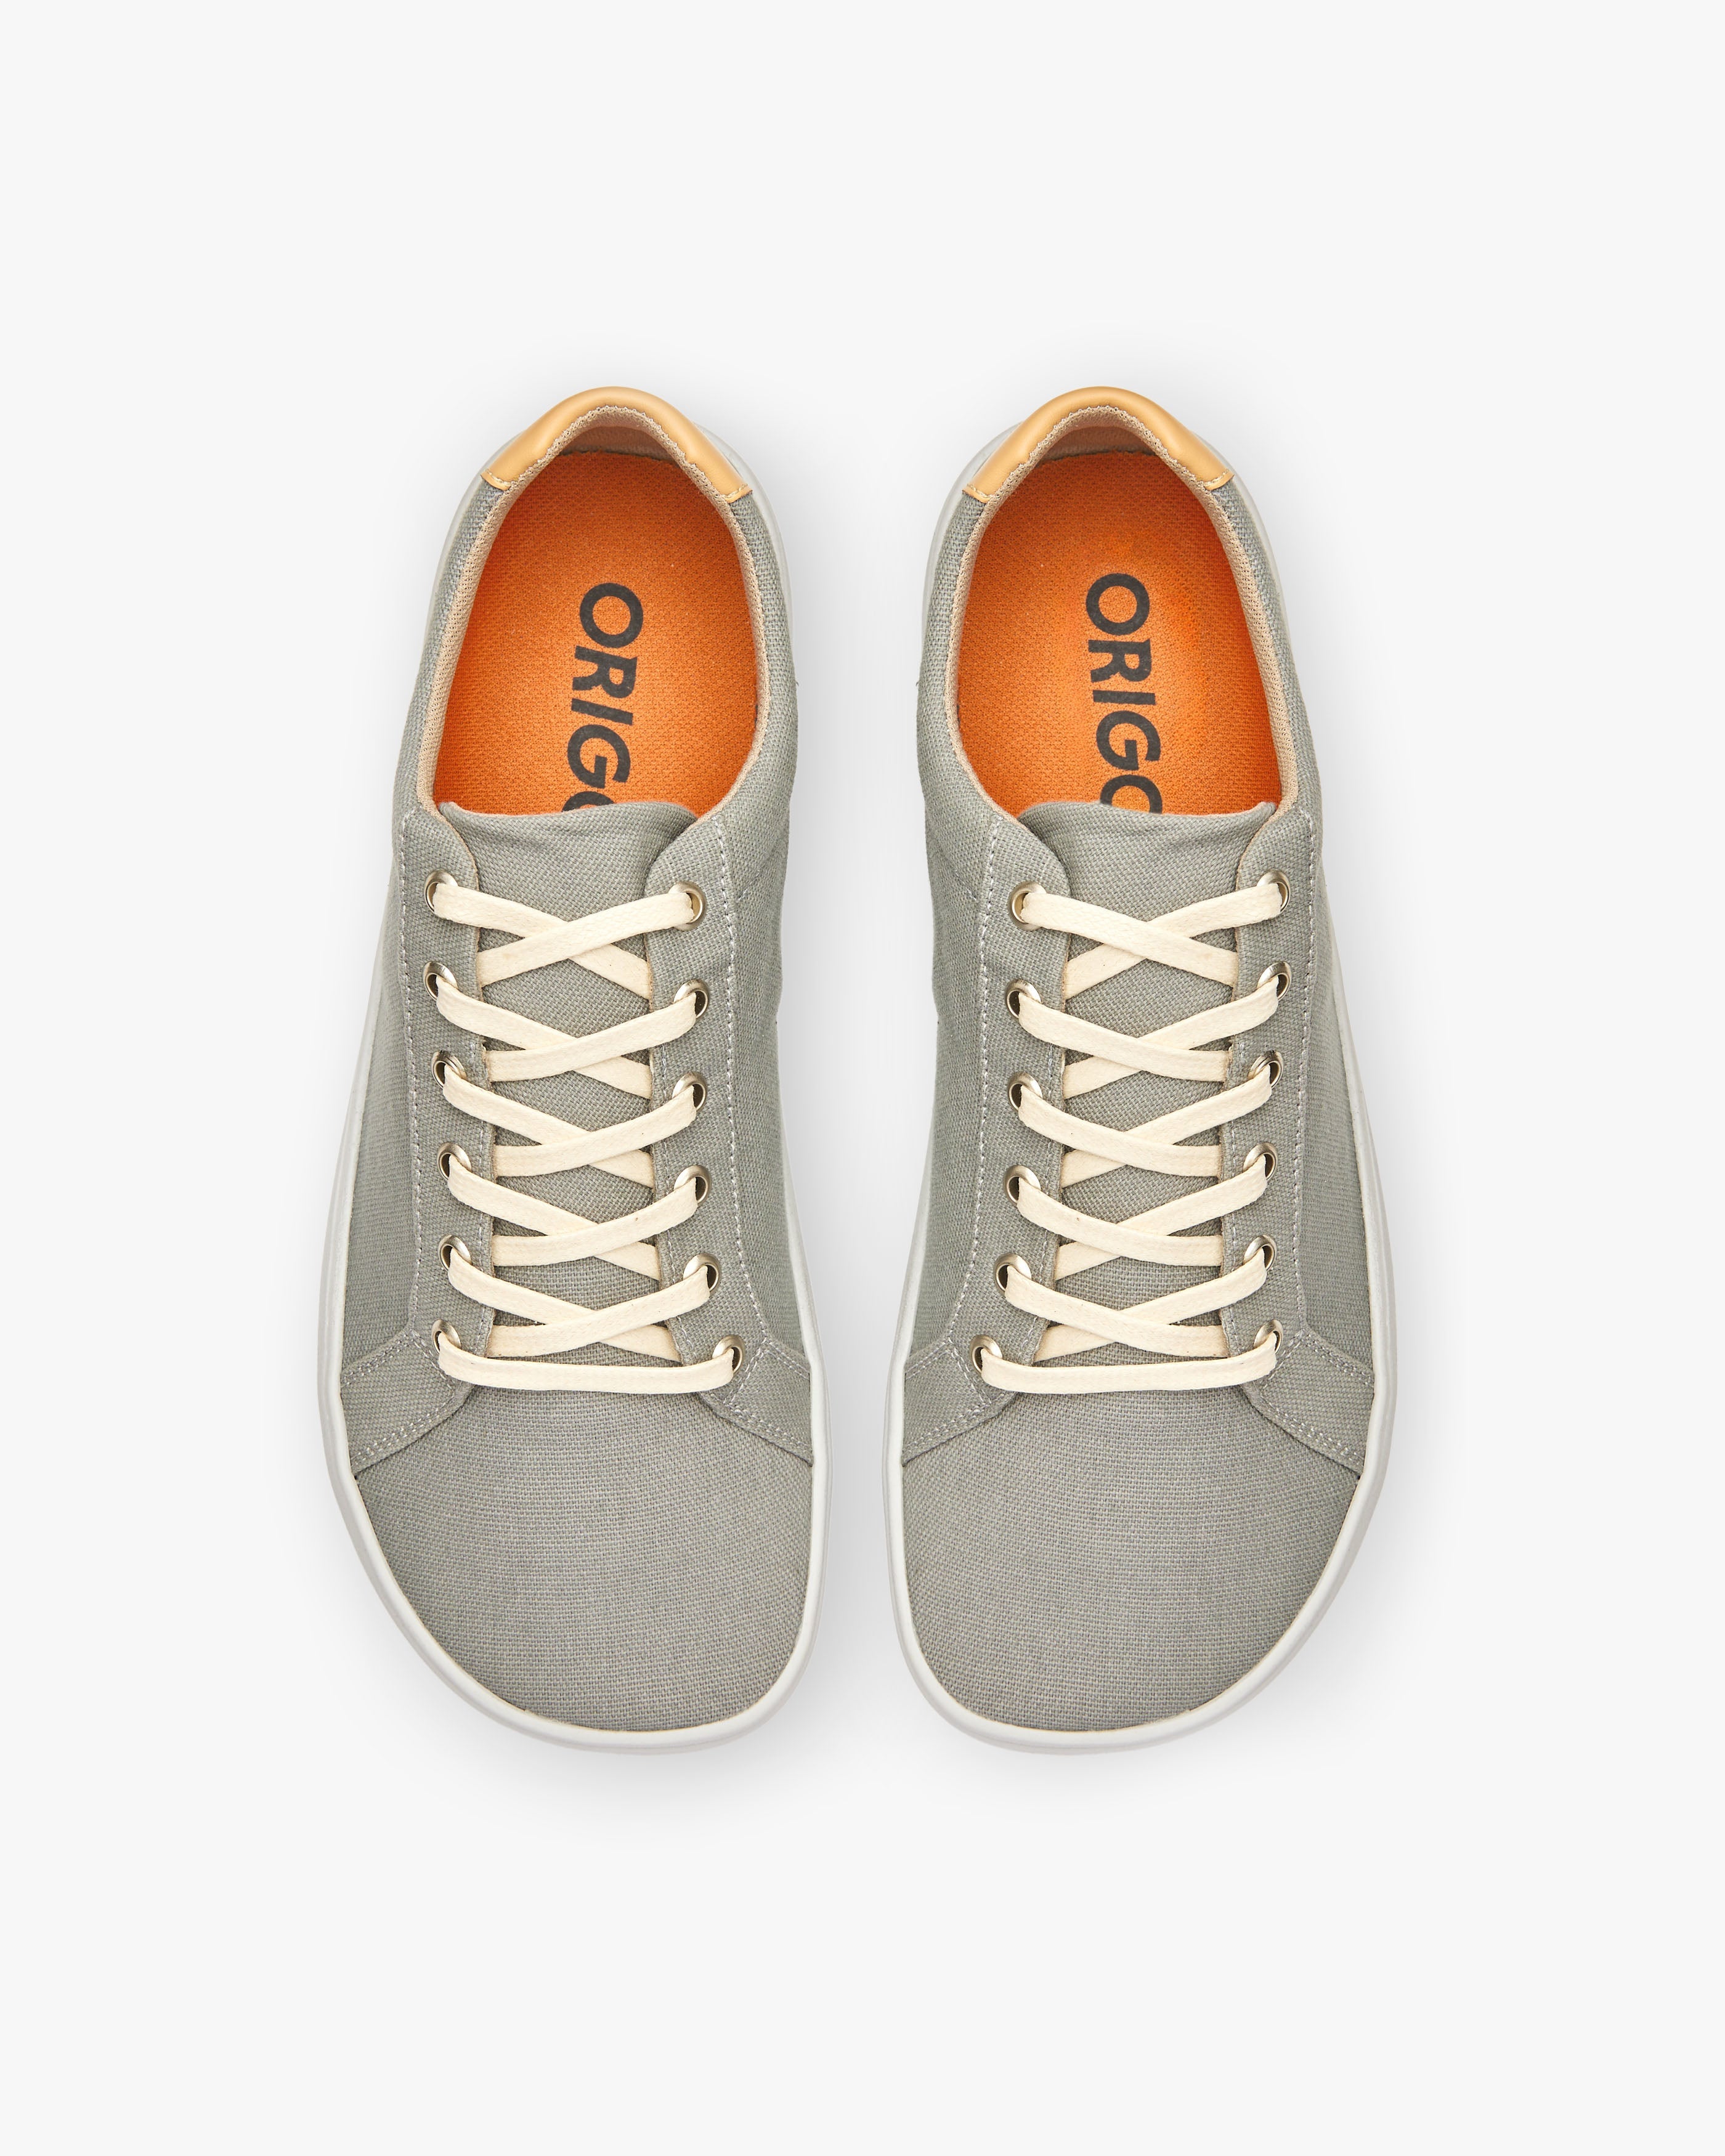 The Everyday Sneaker for Men | Gen 3 in Cotton Canvas-2